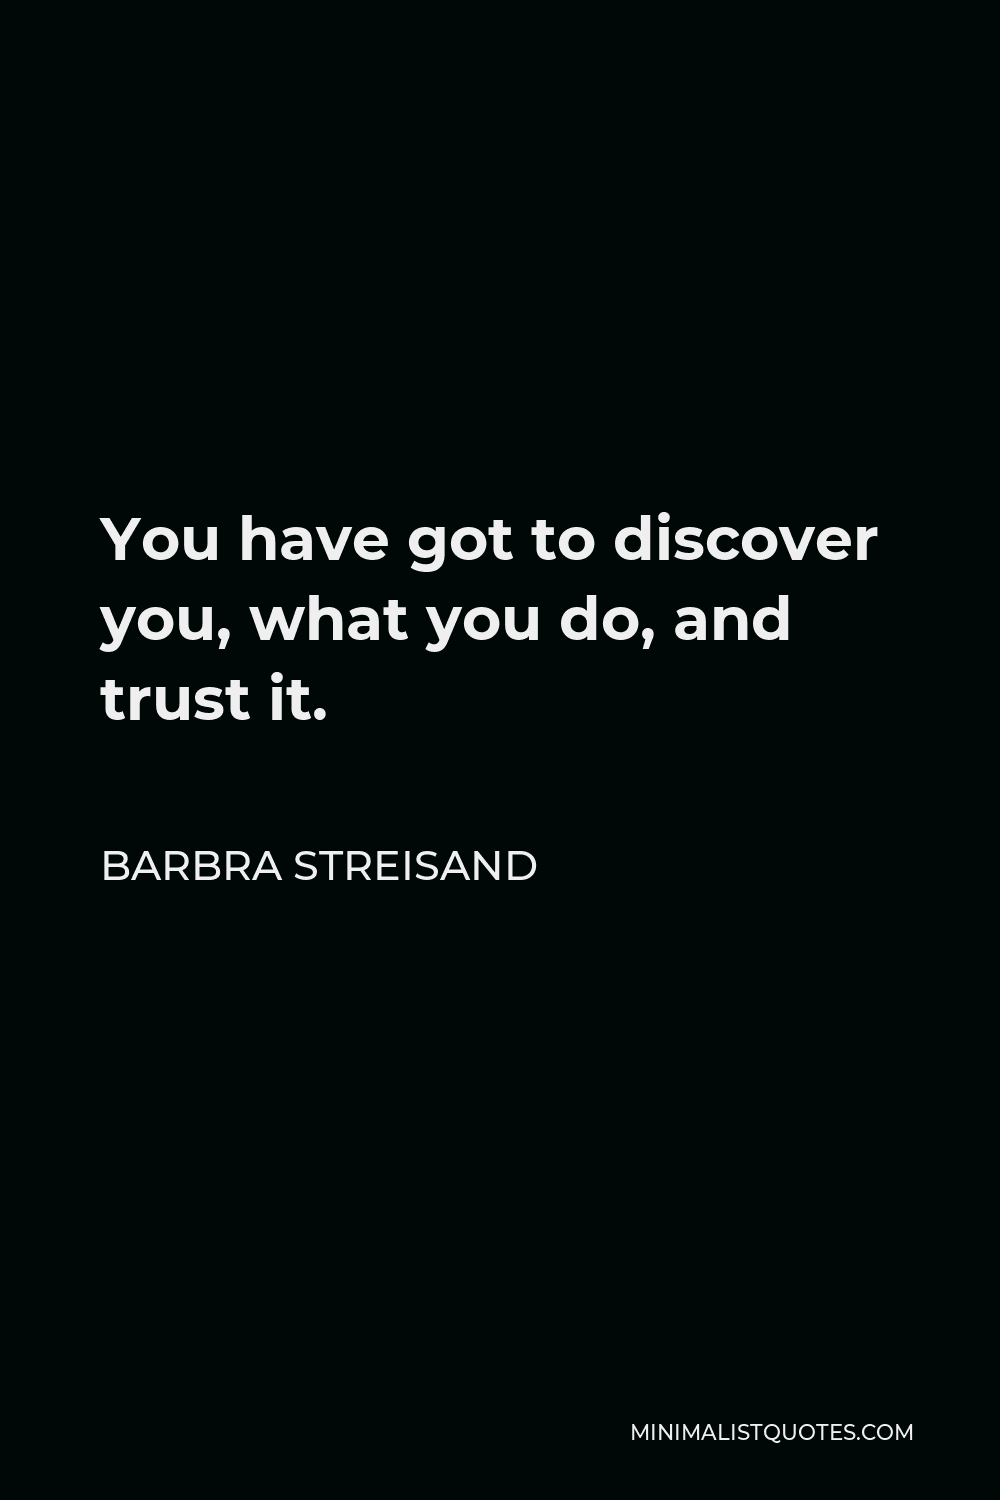 Barbra Streisand Quote - You have got to discover you, what you do, and trust it.